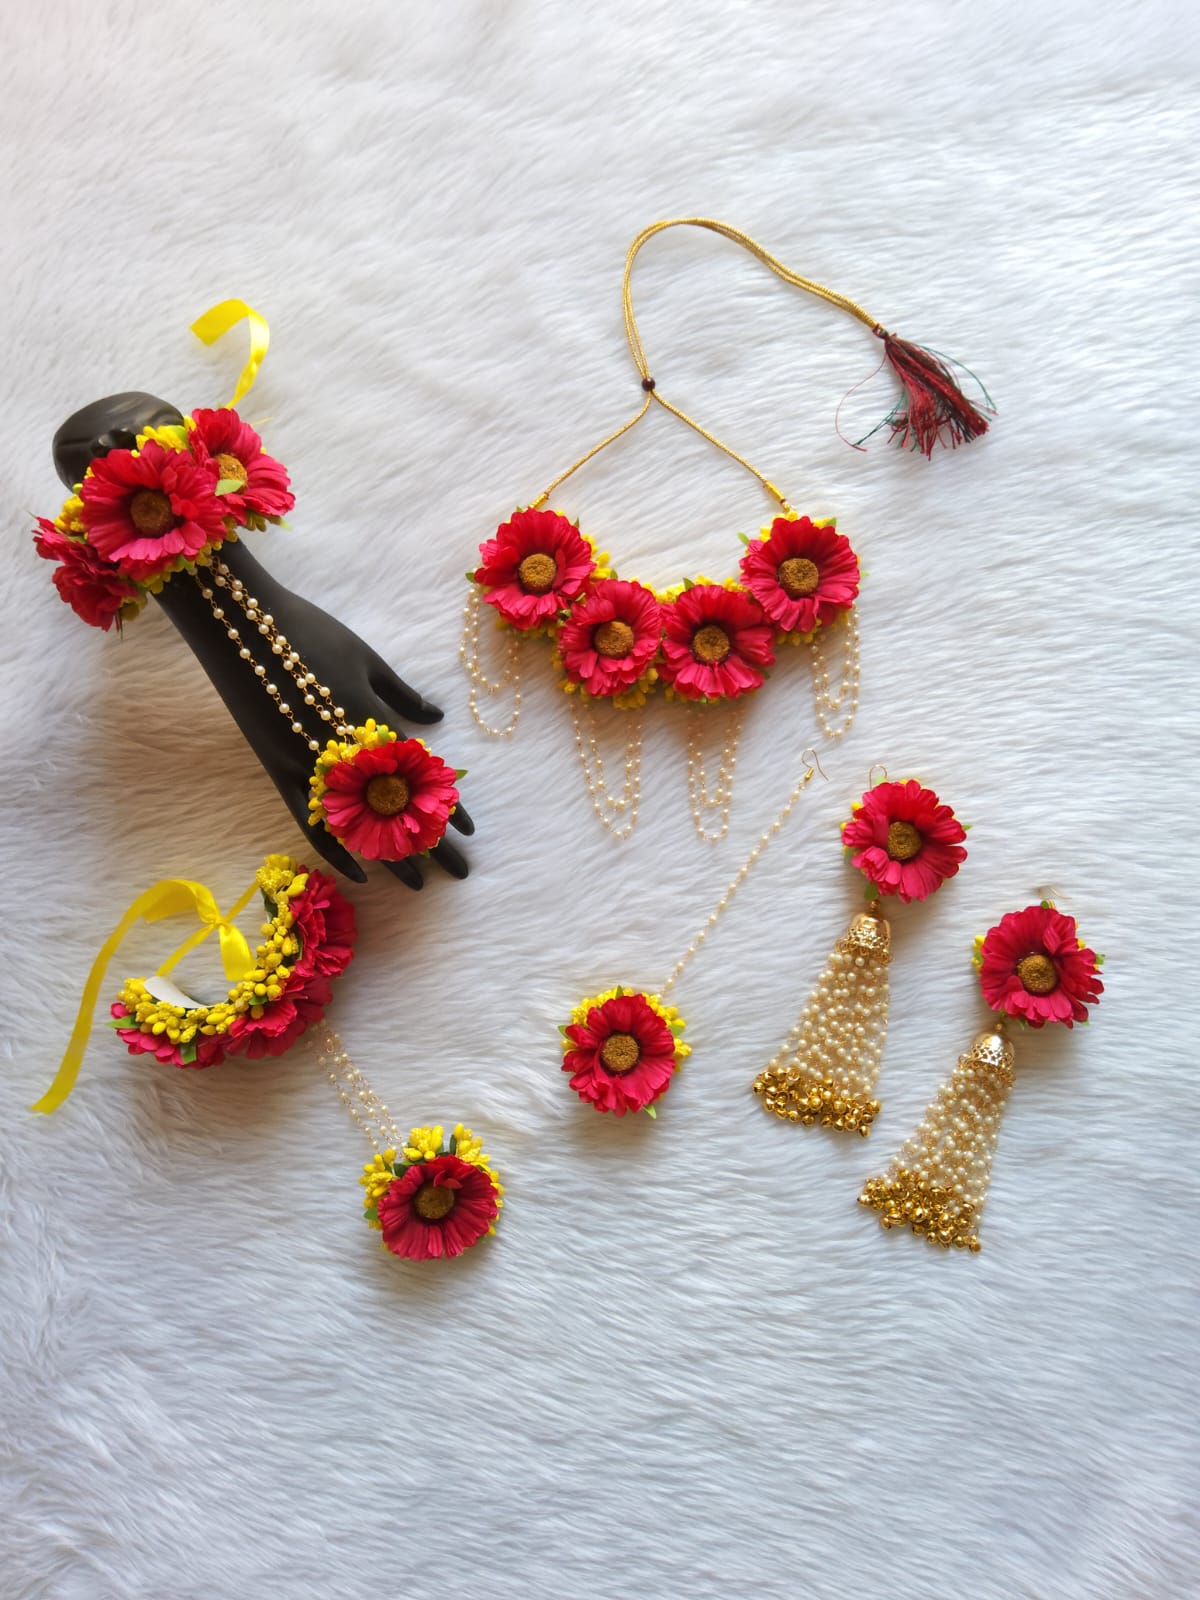 A beautiful and stunning sun flower jewellery set for your mehndi or haldi